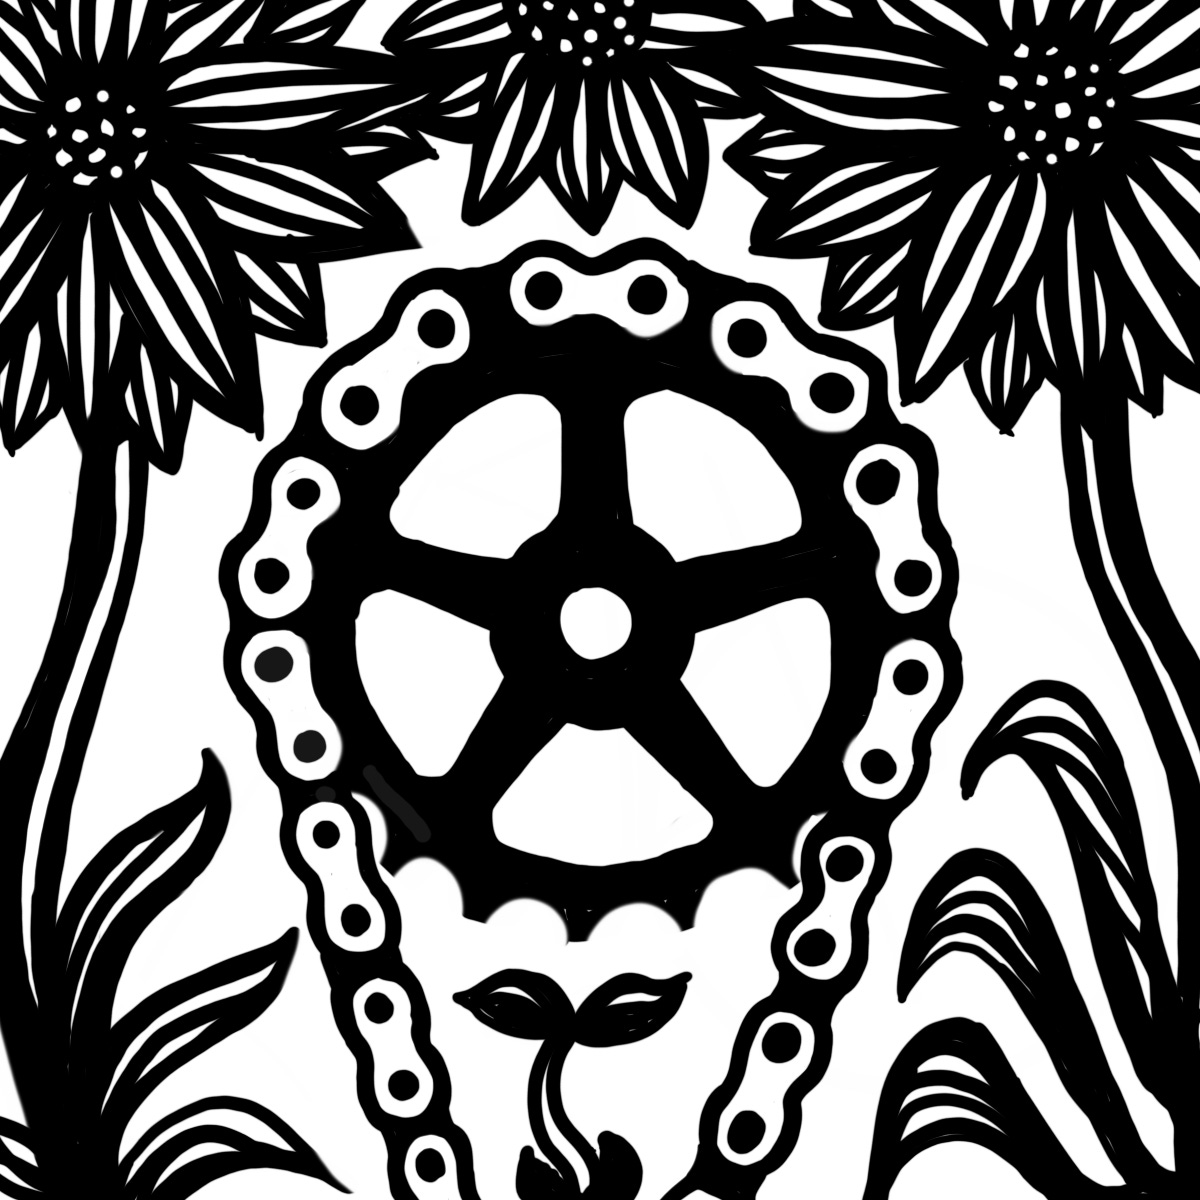 sketch of bicycle sprocket and chain surrounded by flowers and sheltering a germinating seed